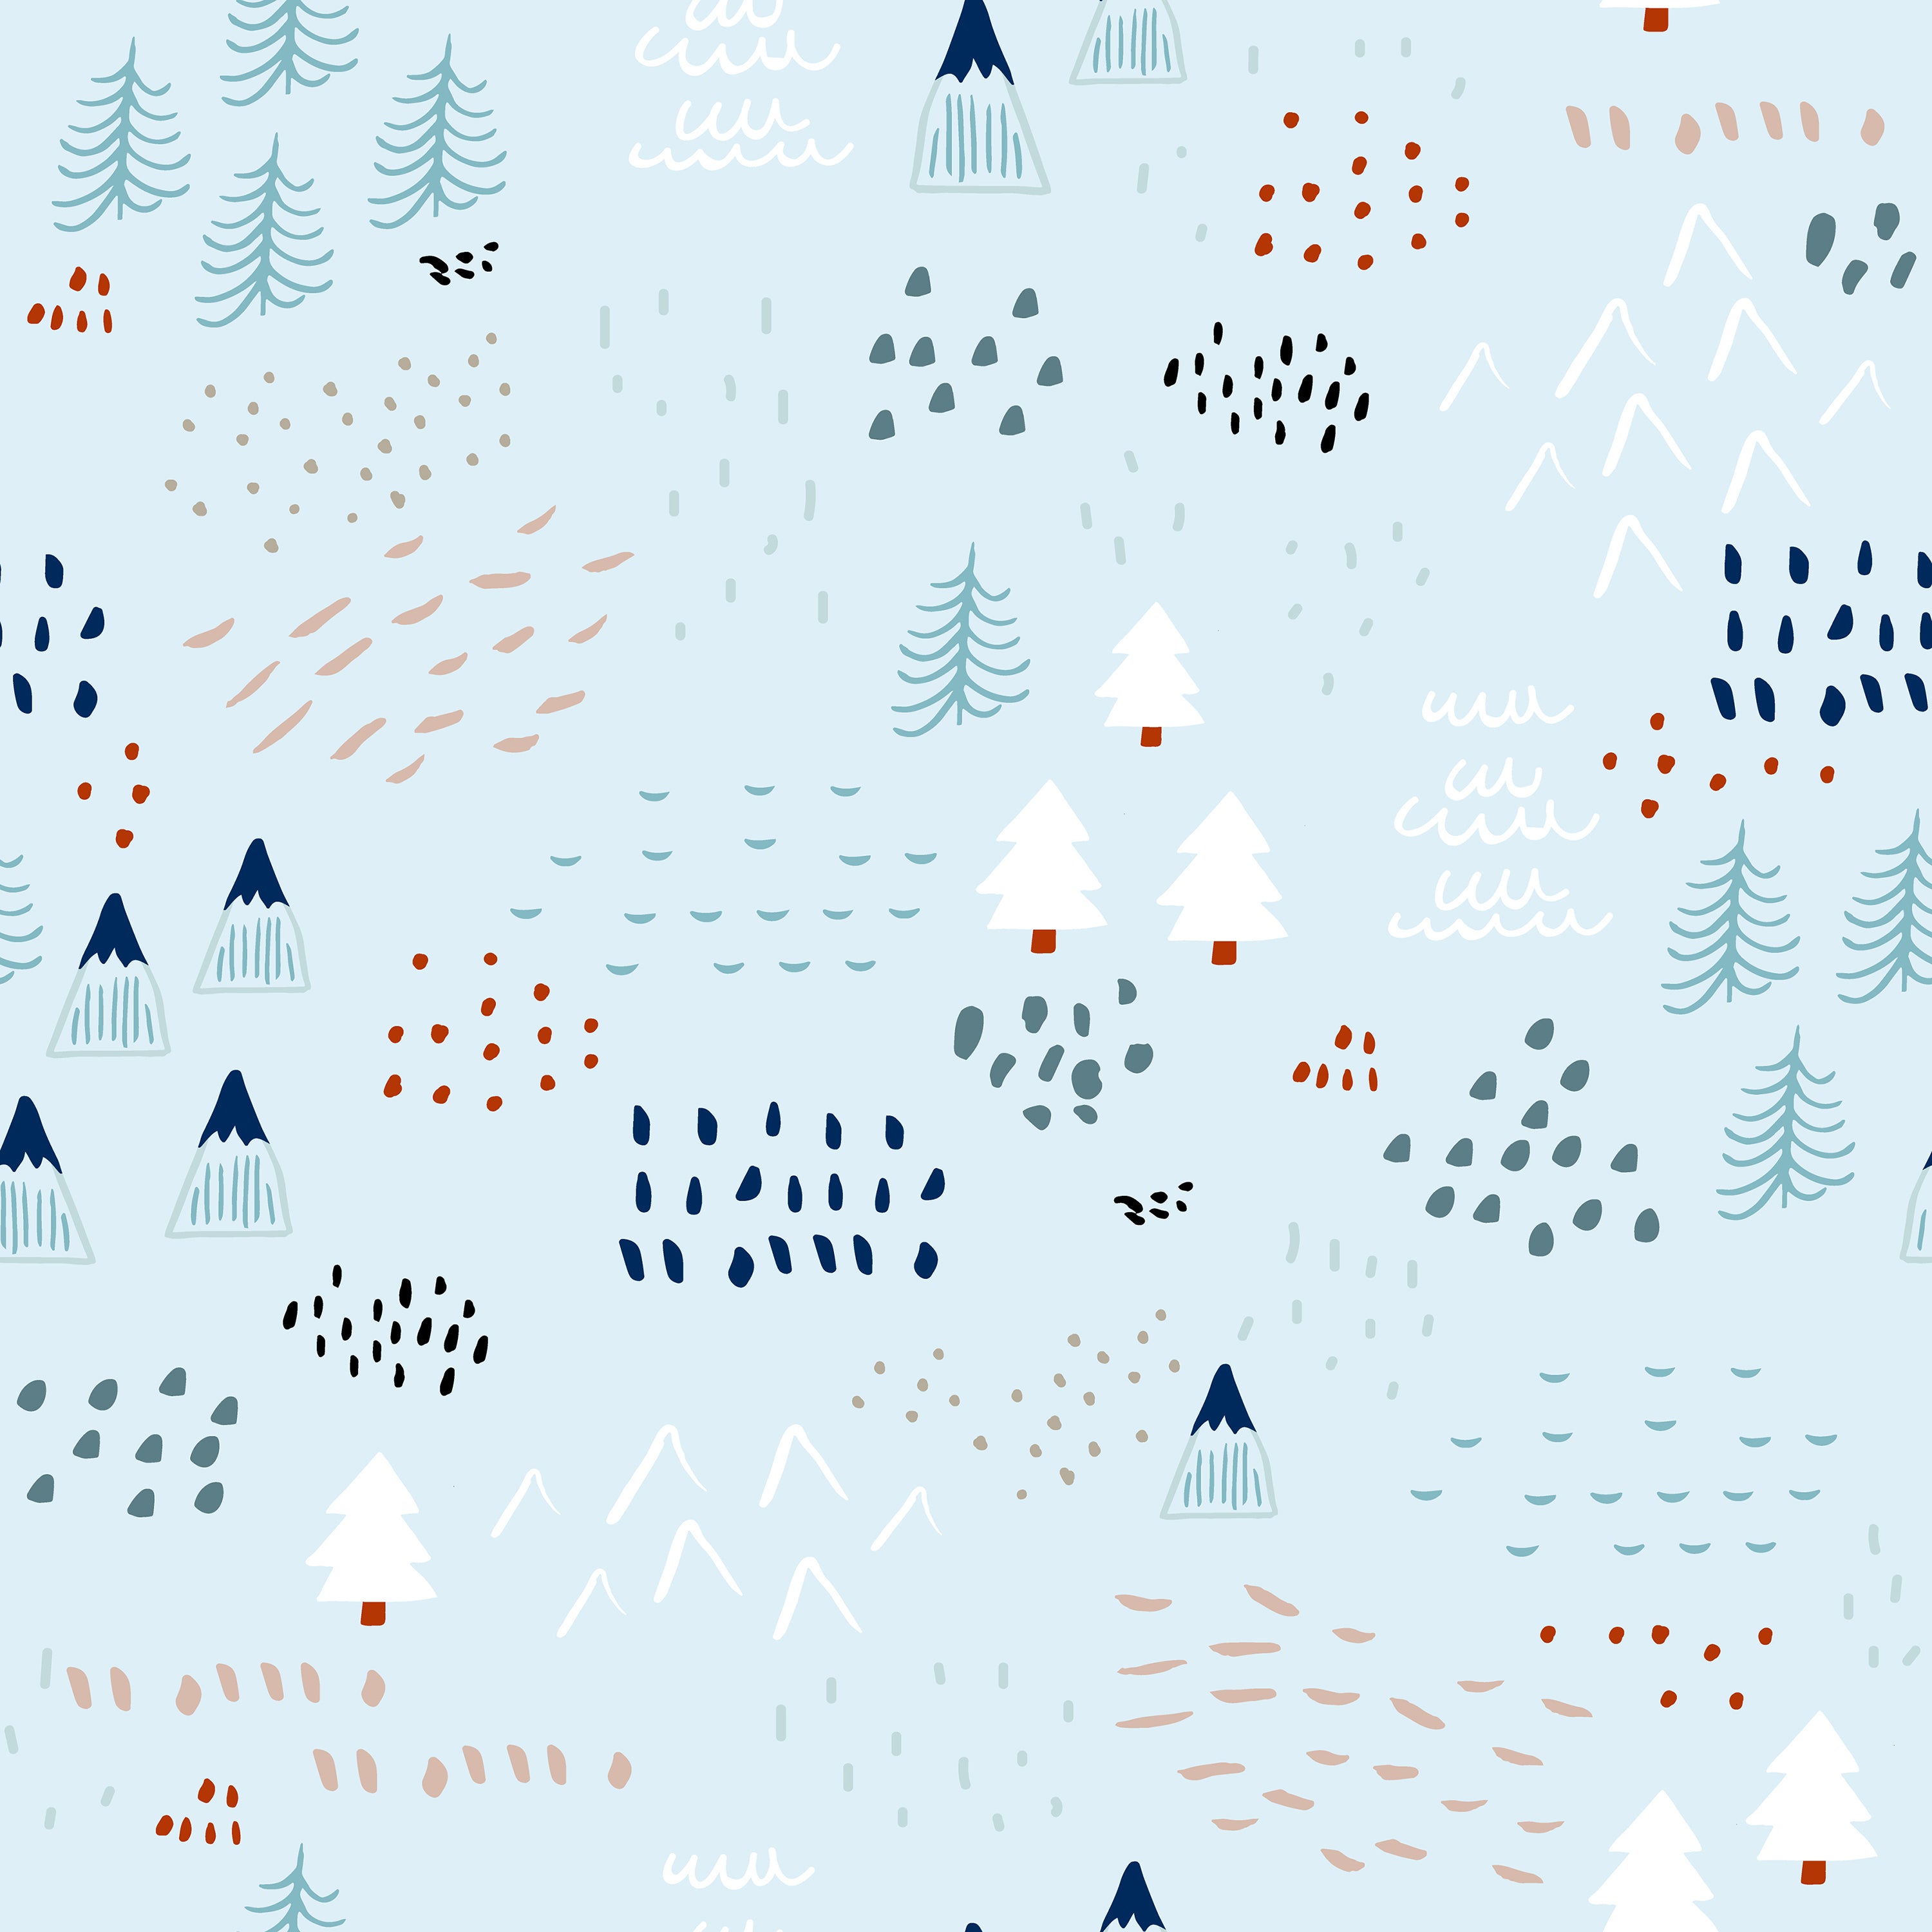 A captivating wallpaper design featuring a serene light blue background decorated with abstract representations of trees, mountains, and weather elements. The scene includes white and navy trees, orange and navy mountains, and various whimsical patterns like dots and dashes, evoking a playful, adventurous spirit.